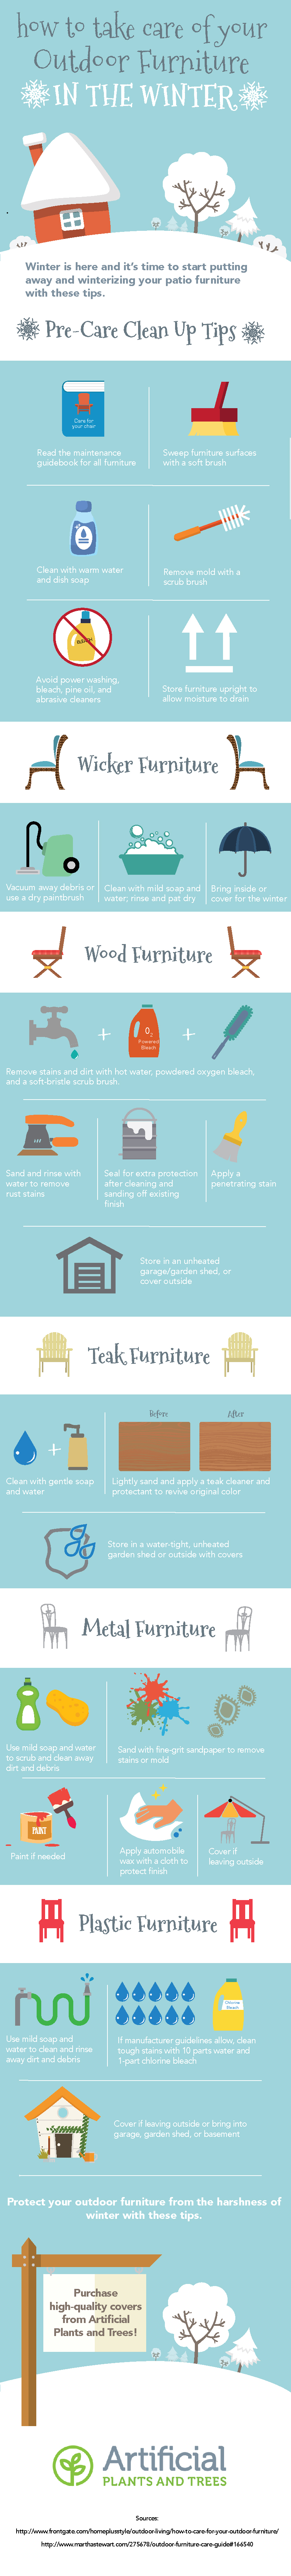 How to Care for Your Patio Furniture in the Winter